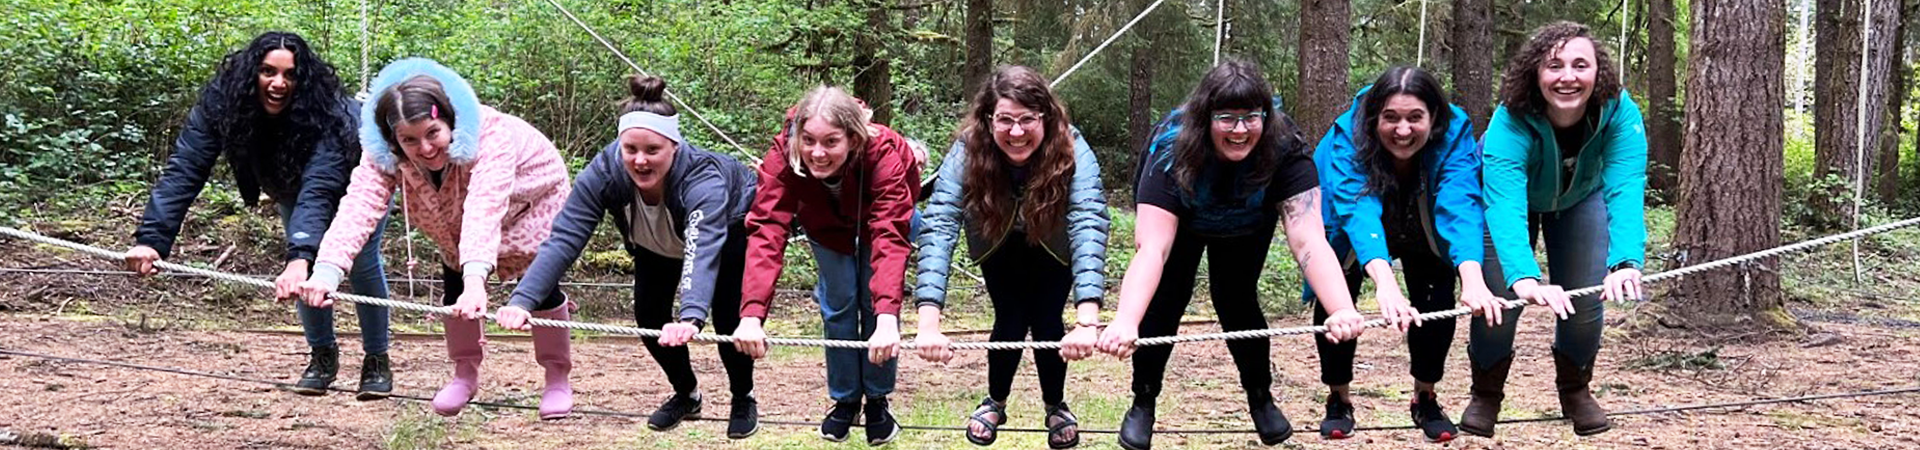  GSOSW staff smiling while balancing on a ropes course element 